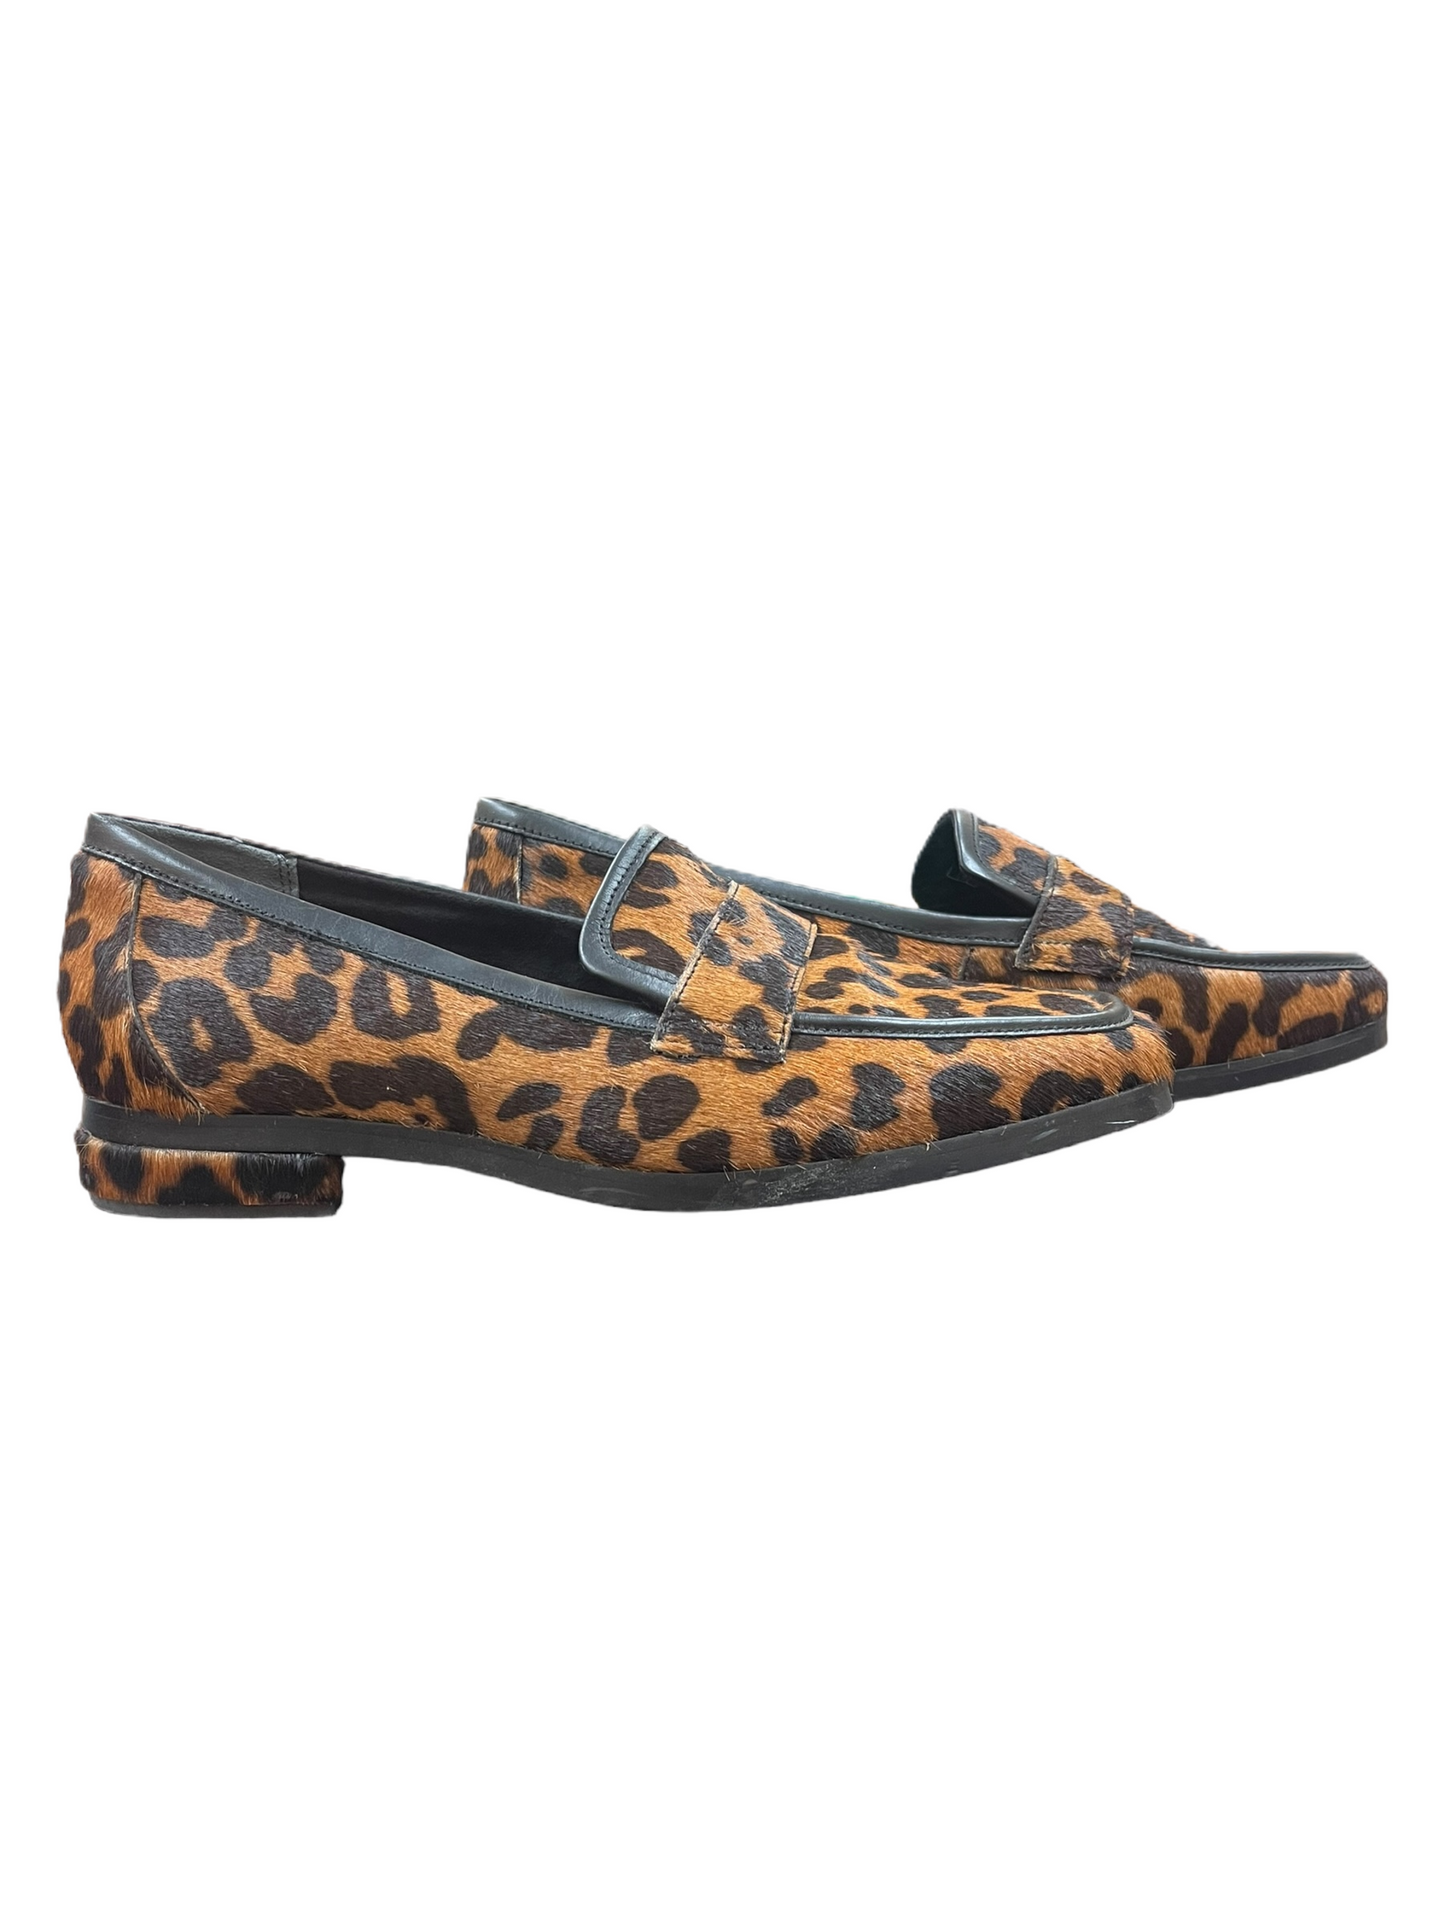 Shoes Flats By Vionic  Size: 7.5